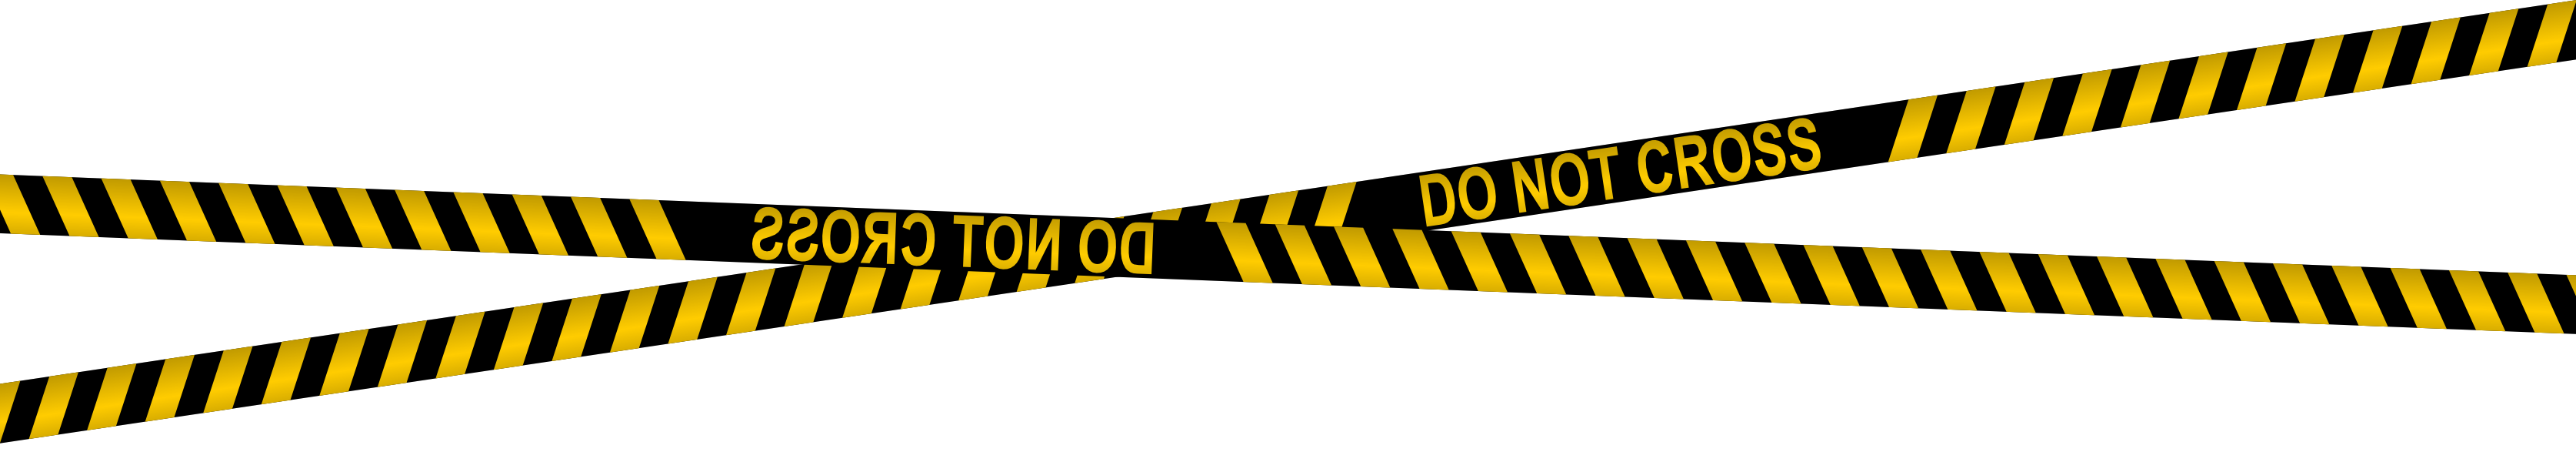 Police Tape PNG Background Image